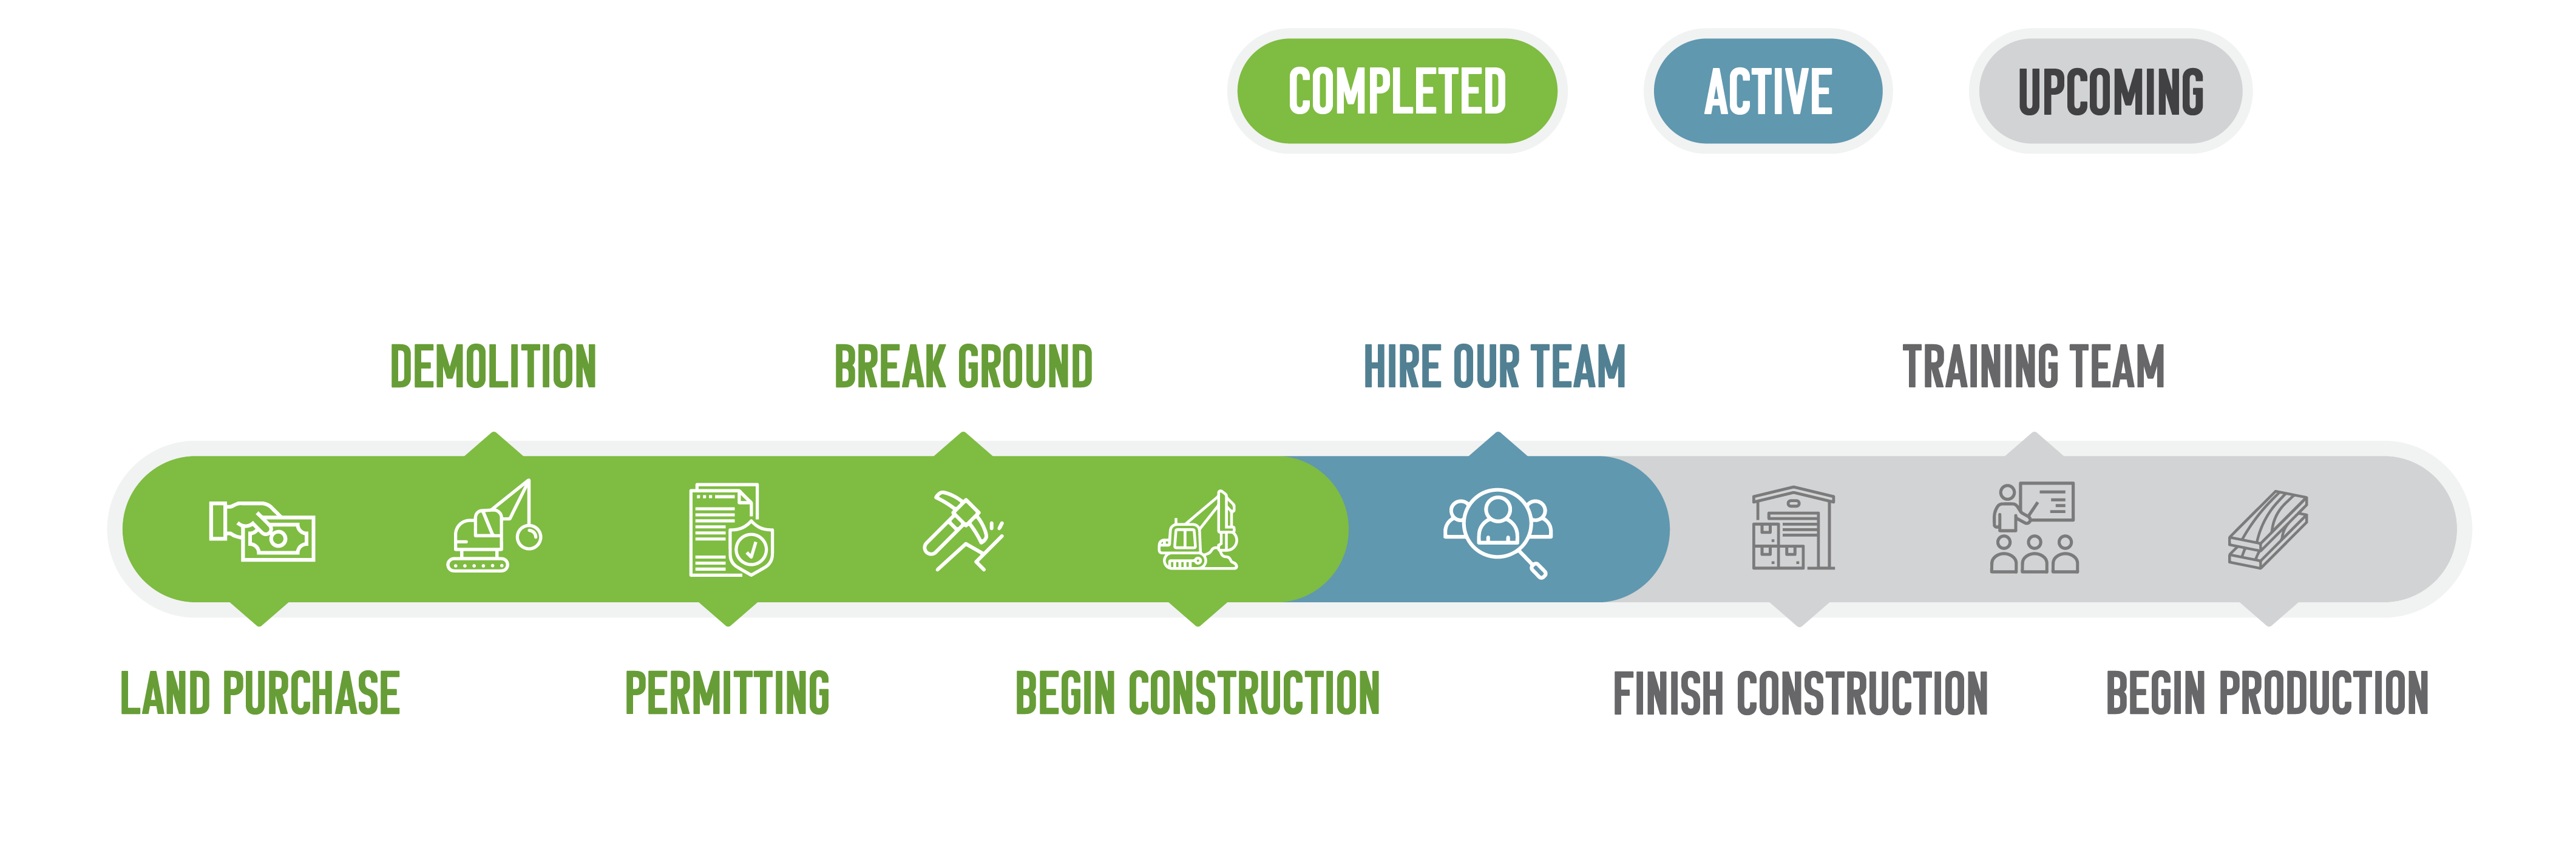 A timeline graphic showing work completed on the Roanoke Valley Lumber project, as well as work still to be completed. The current task is "hire our team"